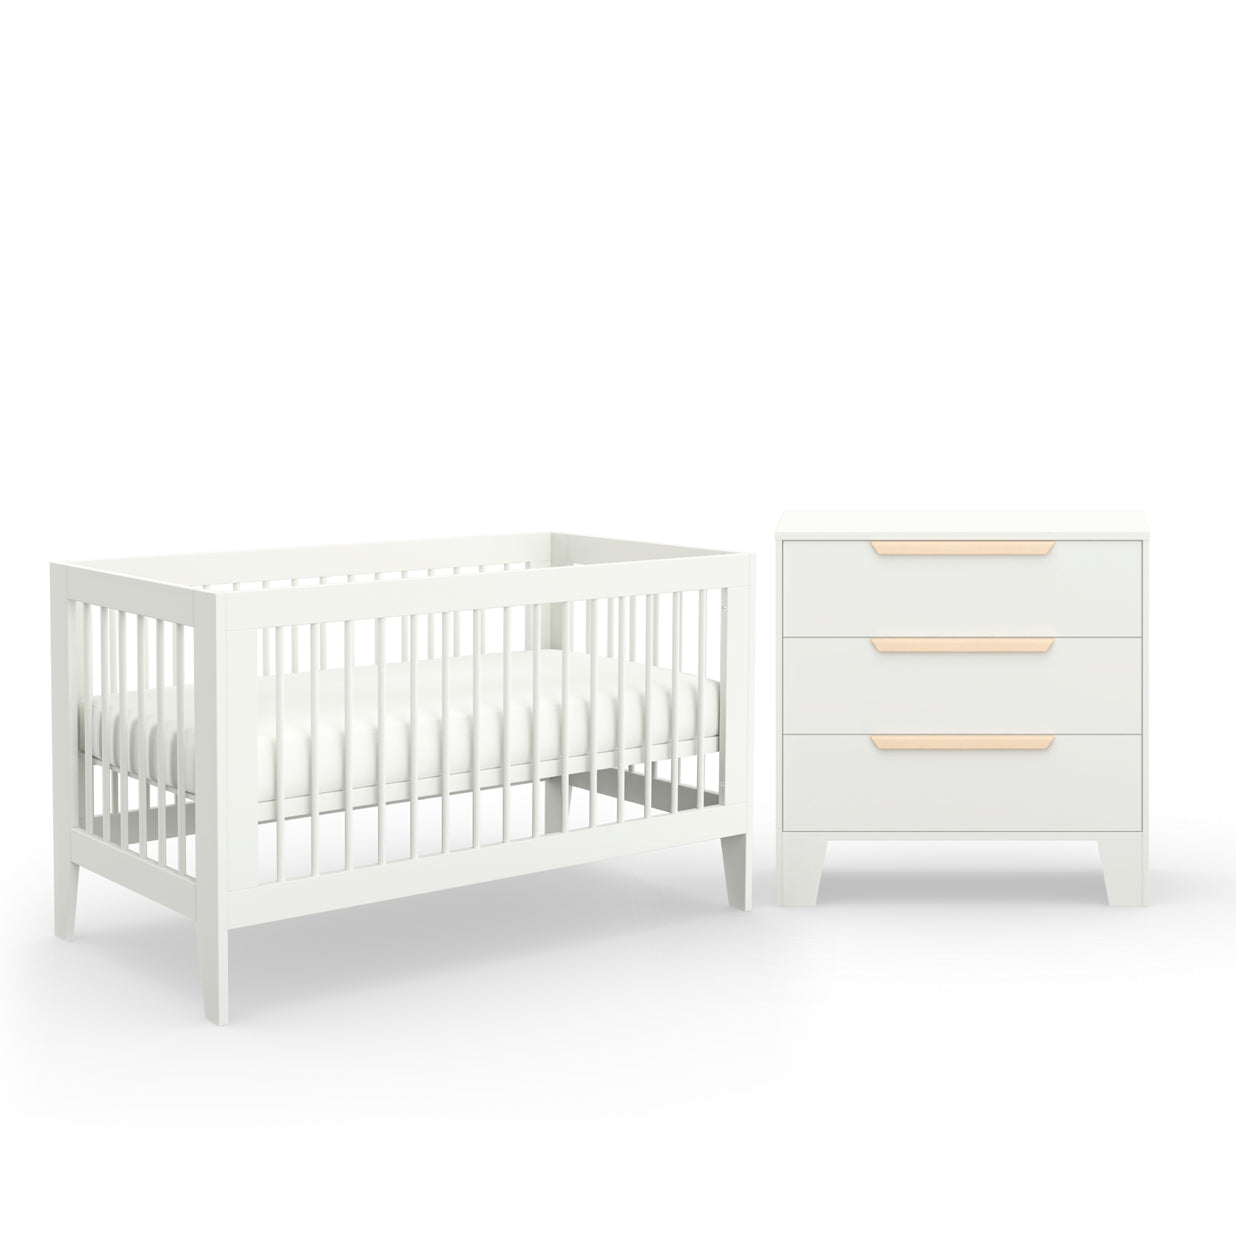 Hague Cot & Chest Nursery Package - White